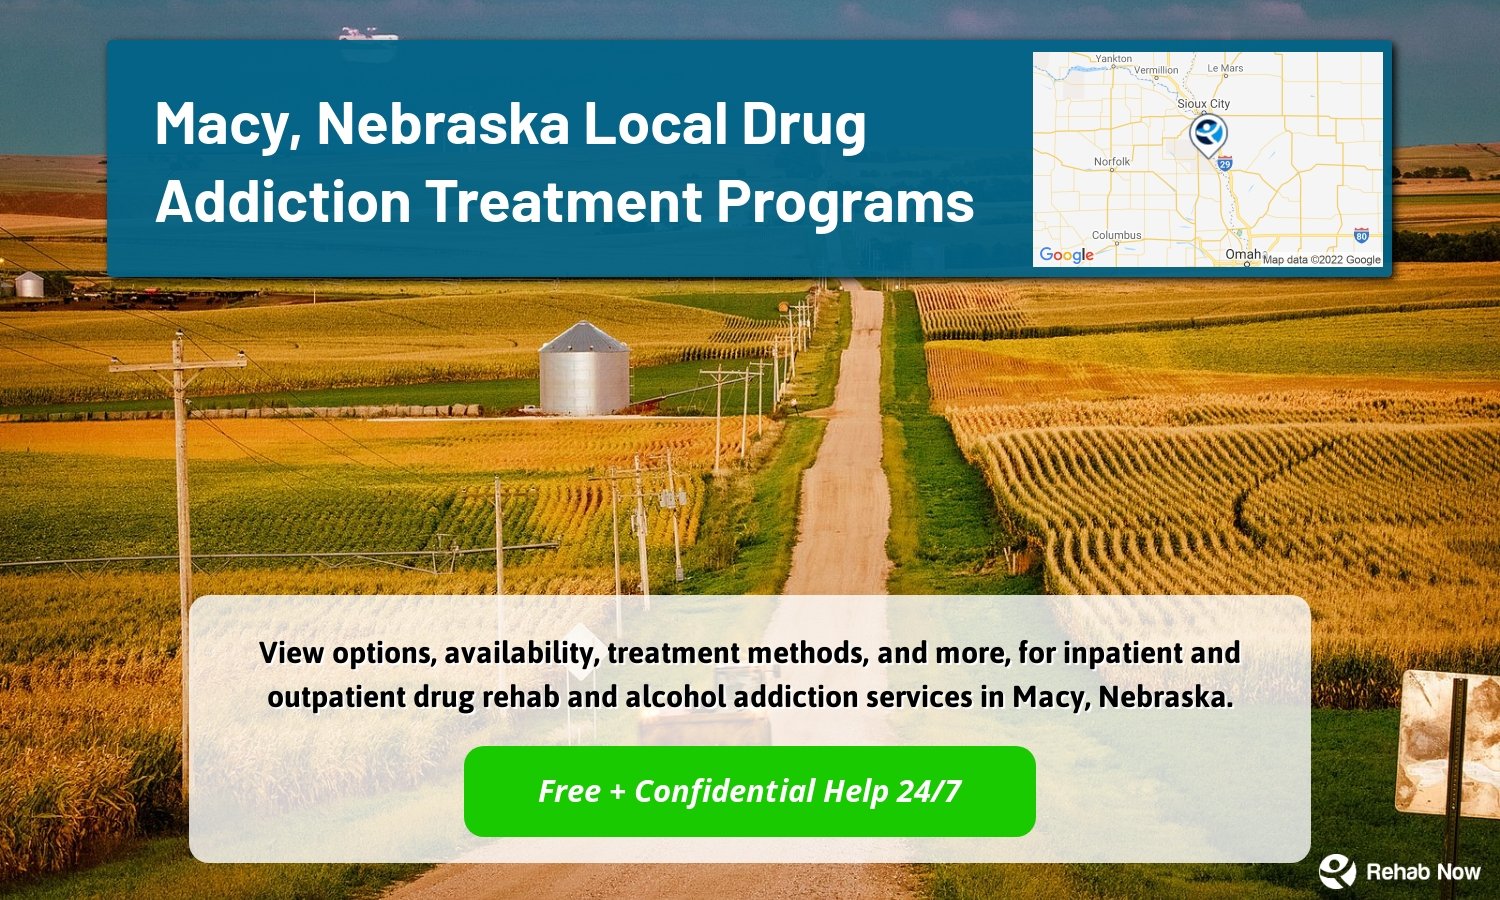 View options, availability, treatment methods, and more, for inpatient and outpatient drug rehab and alcohol addiction services in Macy, Nebraska.